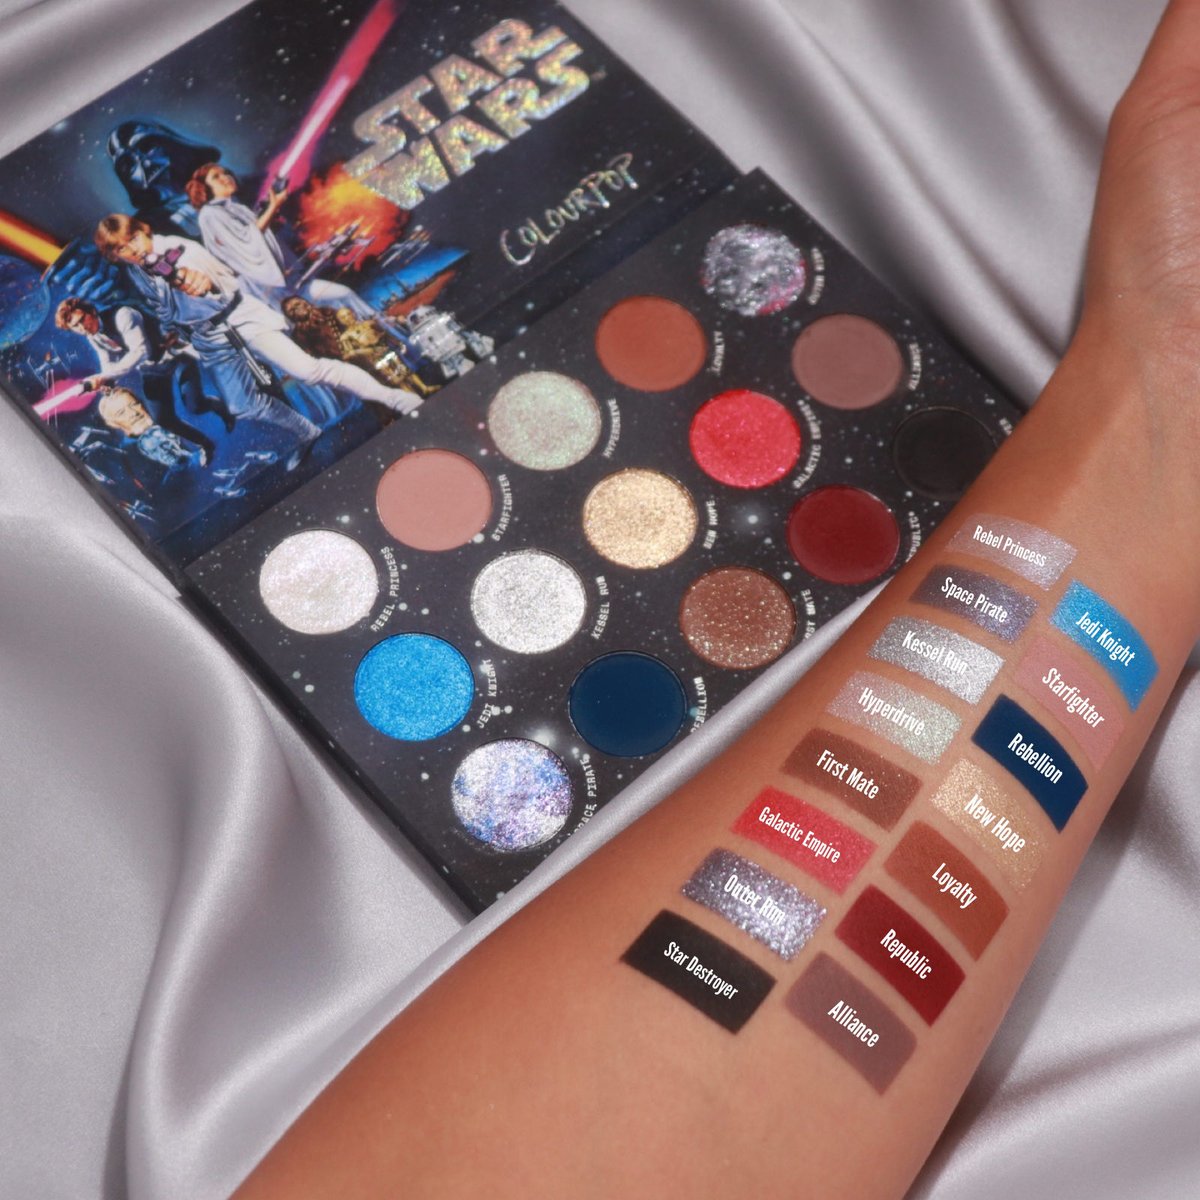 Celebrate May the 4th with the cosmic Star Wars™ 15 pan palette! ❤️💫💙 Currently 20% off today only on colourpop.com! 🪐

Which shade is out of this world? Peep the Tie Dye Super Shock finish! 👀✨

@sadiexoxos | @maquillageitup #StarWars #ColourPop